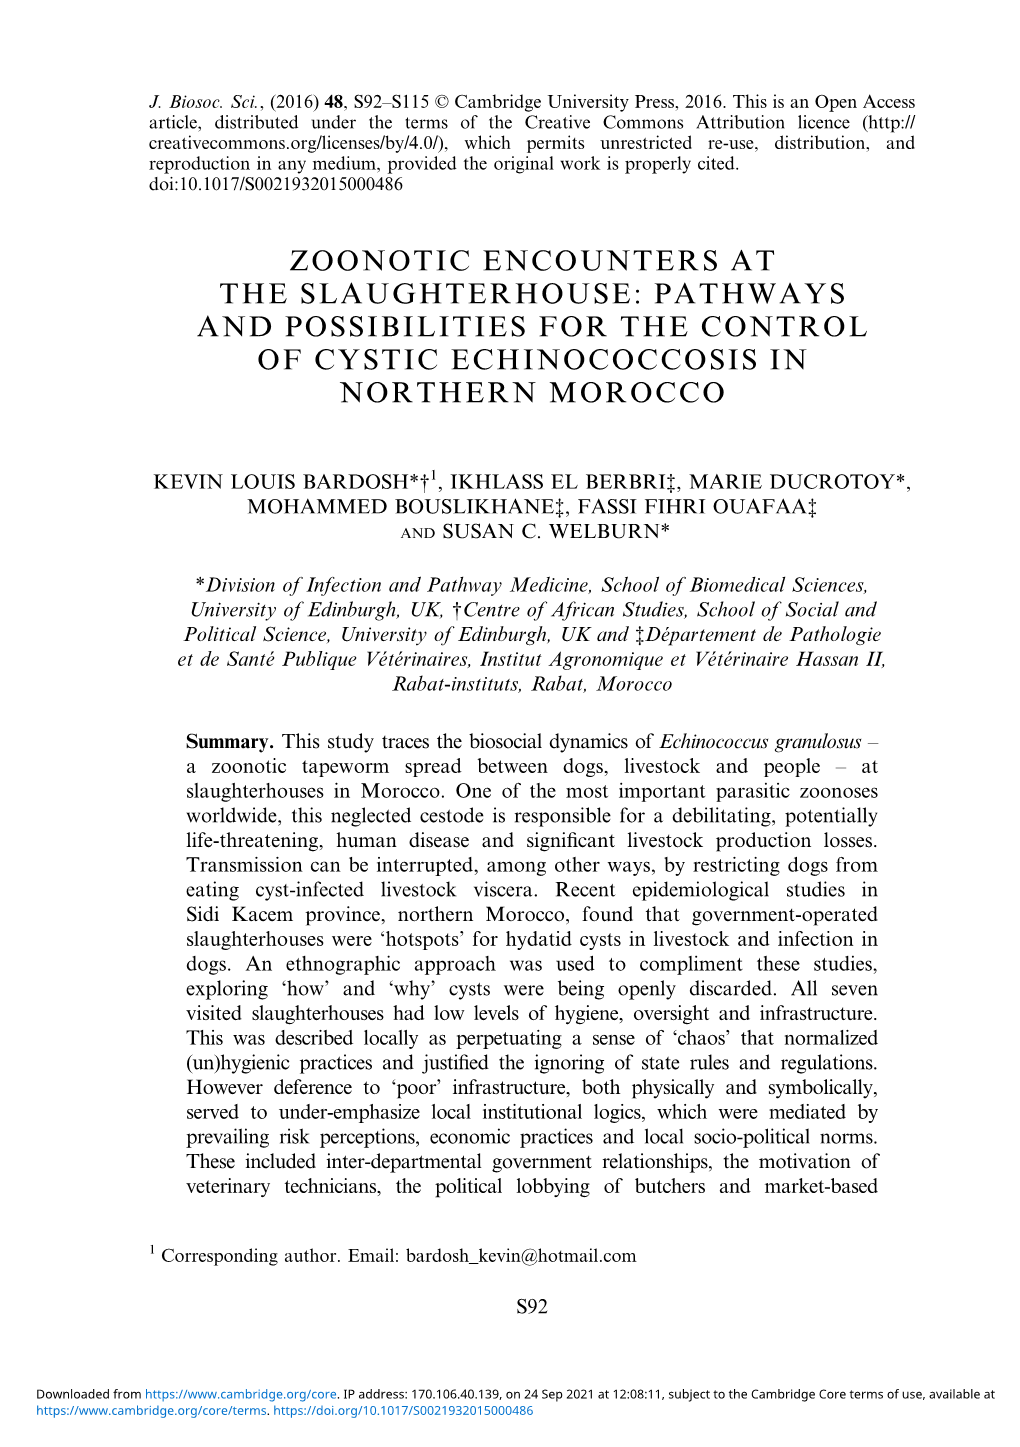 Zoonotic Encounters at the Slaughterhouse: Pathways and Possibilities for the Control of Cystic Echinococcosis in Northern Morocco